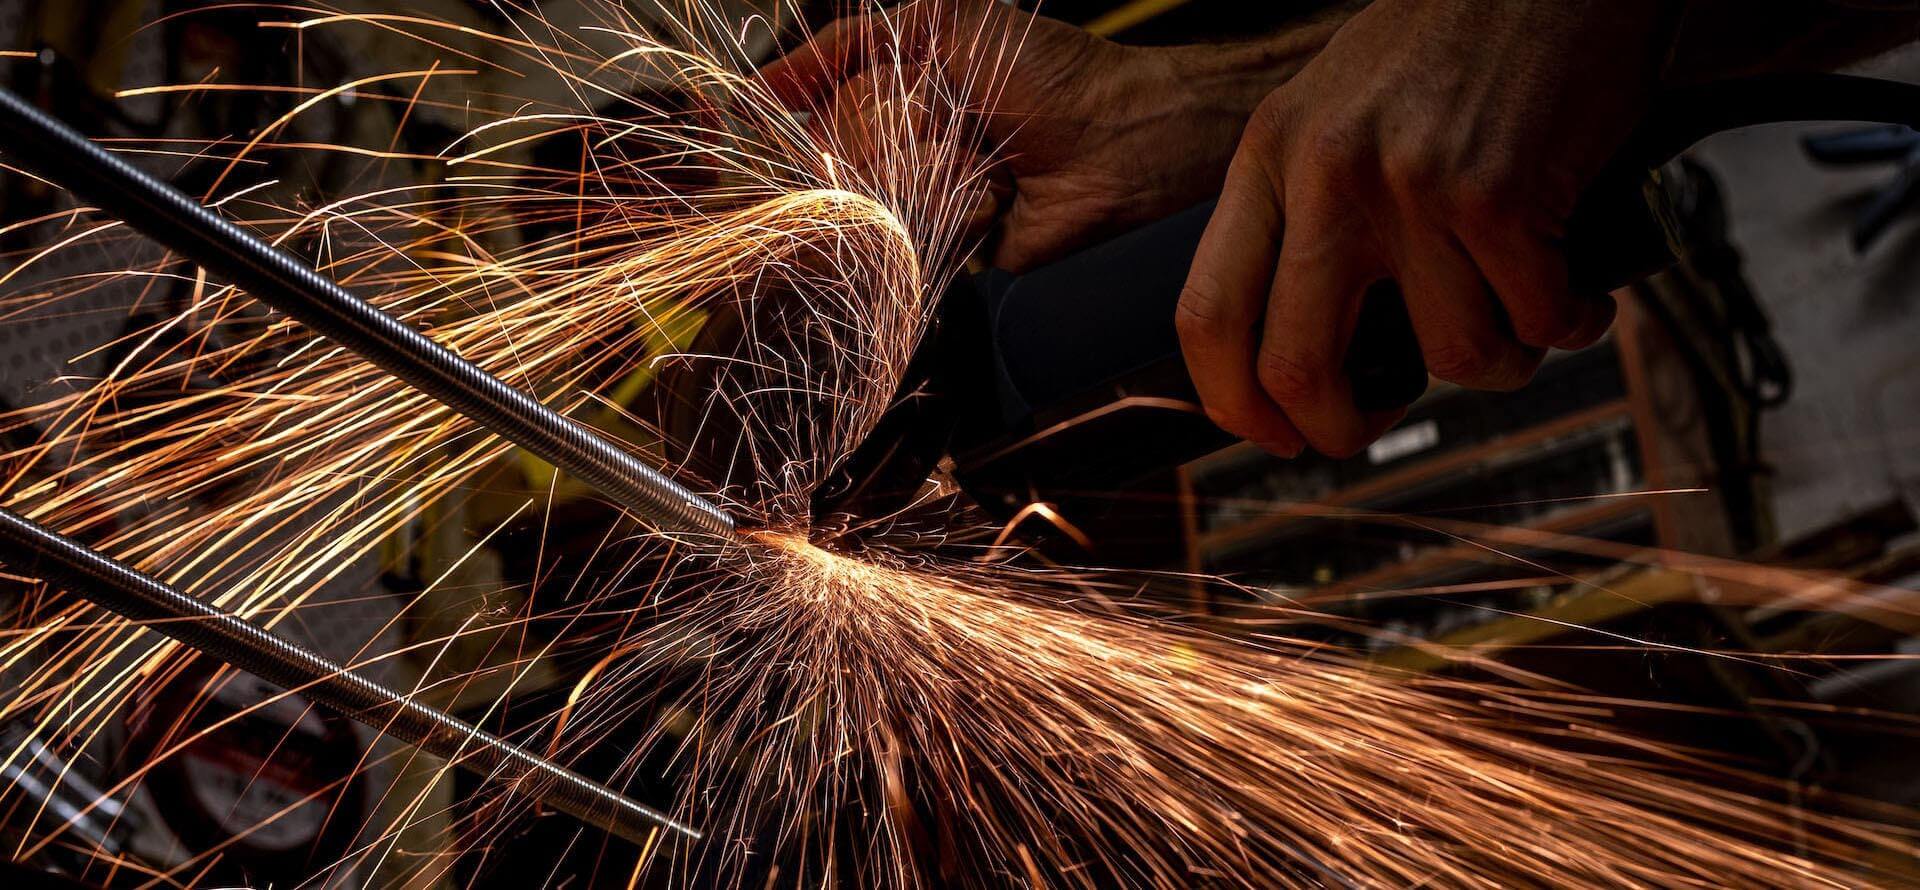 angle grinder with sparks. Photo by david gilbertson unsplash